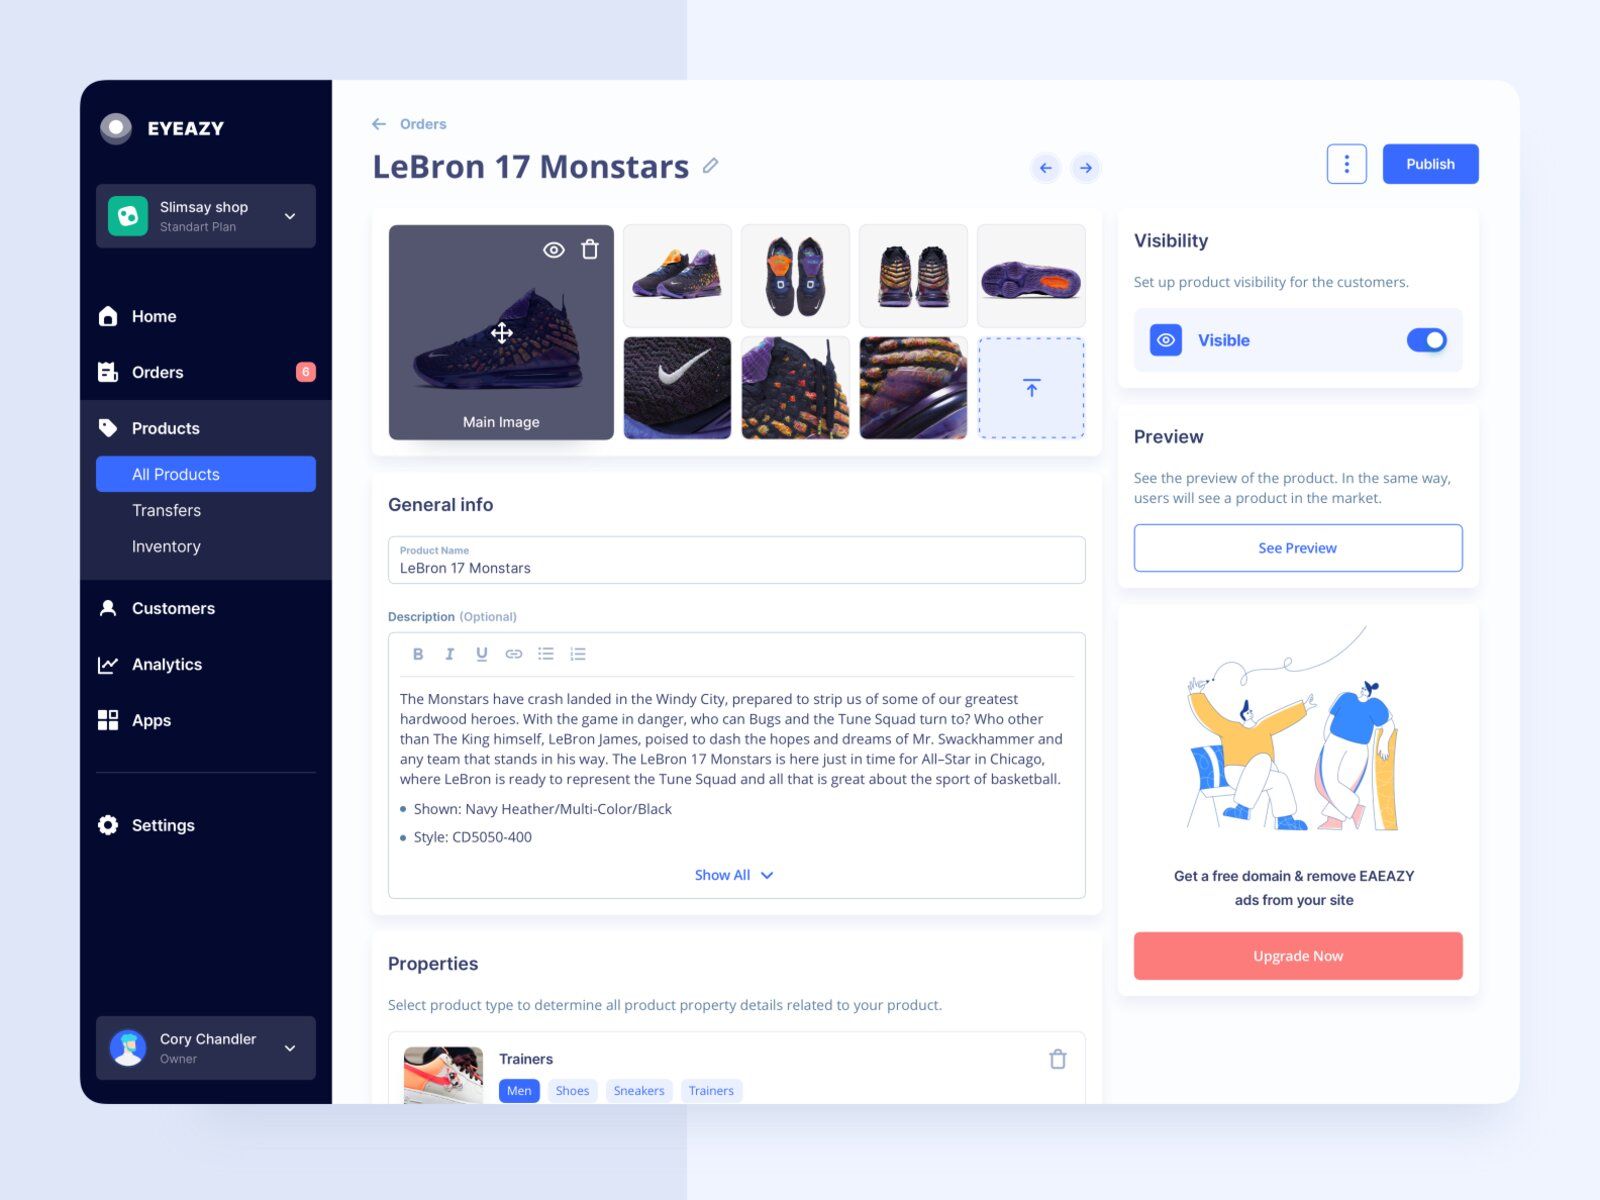 A great example of Product Screen to build an online marketplace (*image by [Liev Liakh](https://dribbble.com/Liev_Liakh){ rel="nofollow" target="_blank" .default-md}*)